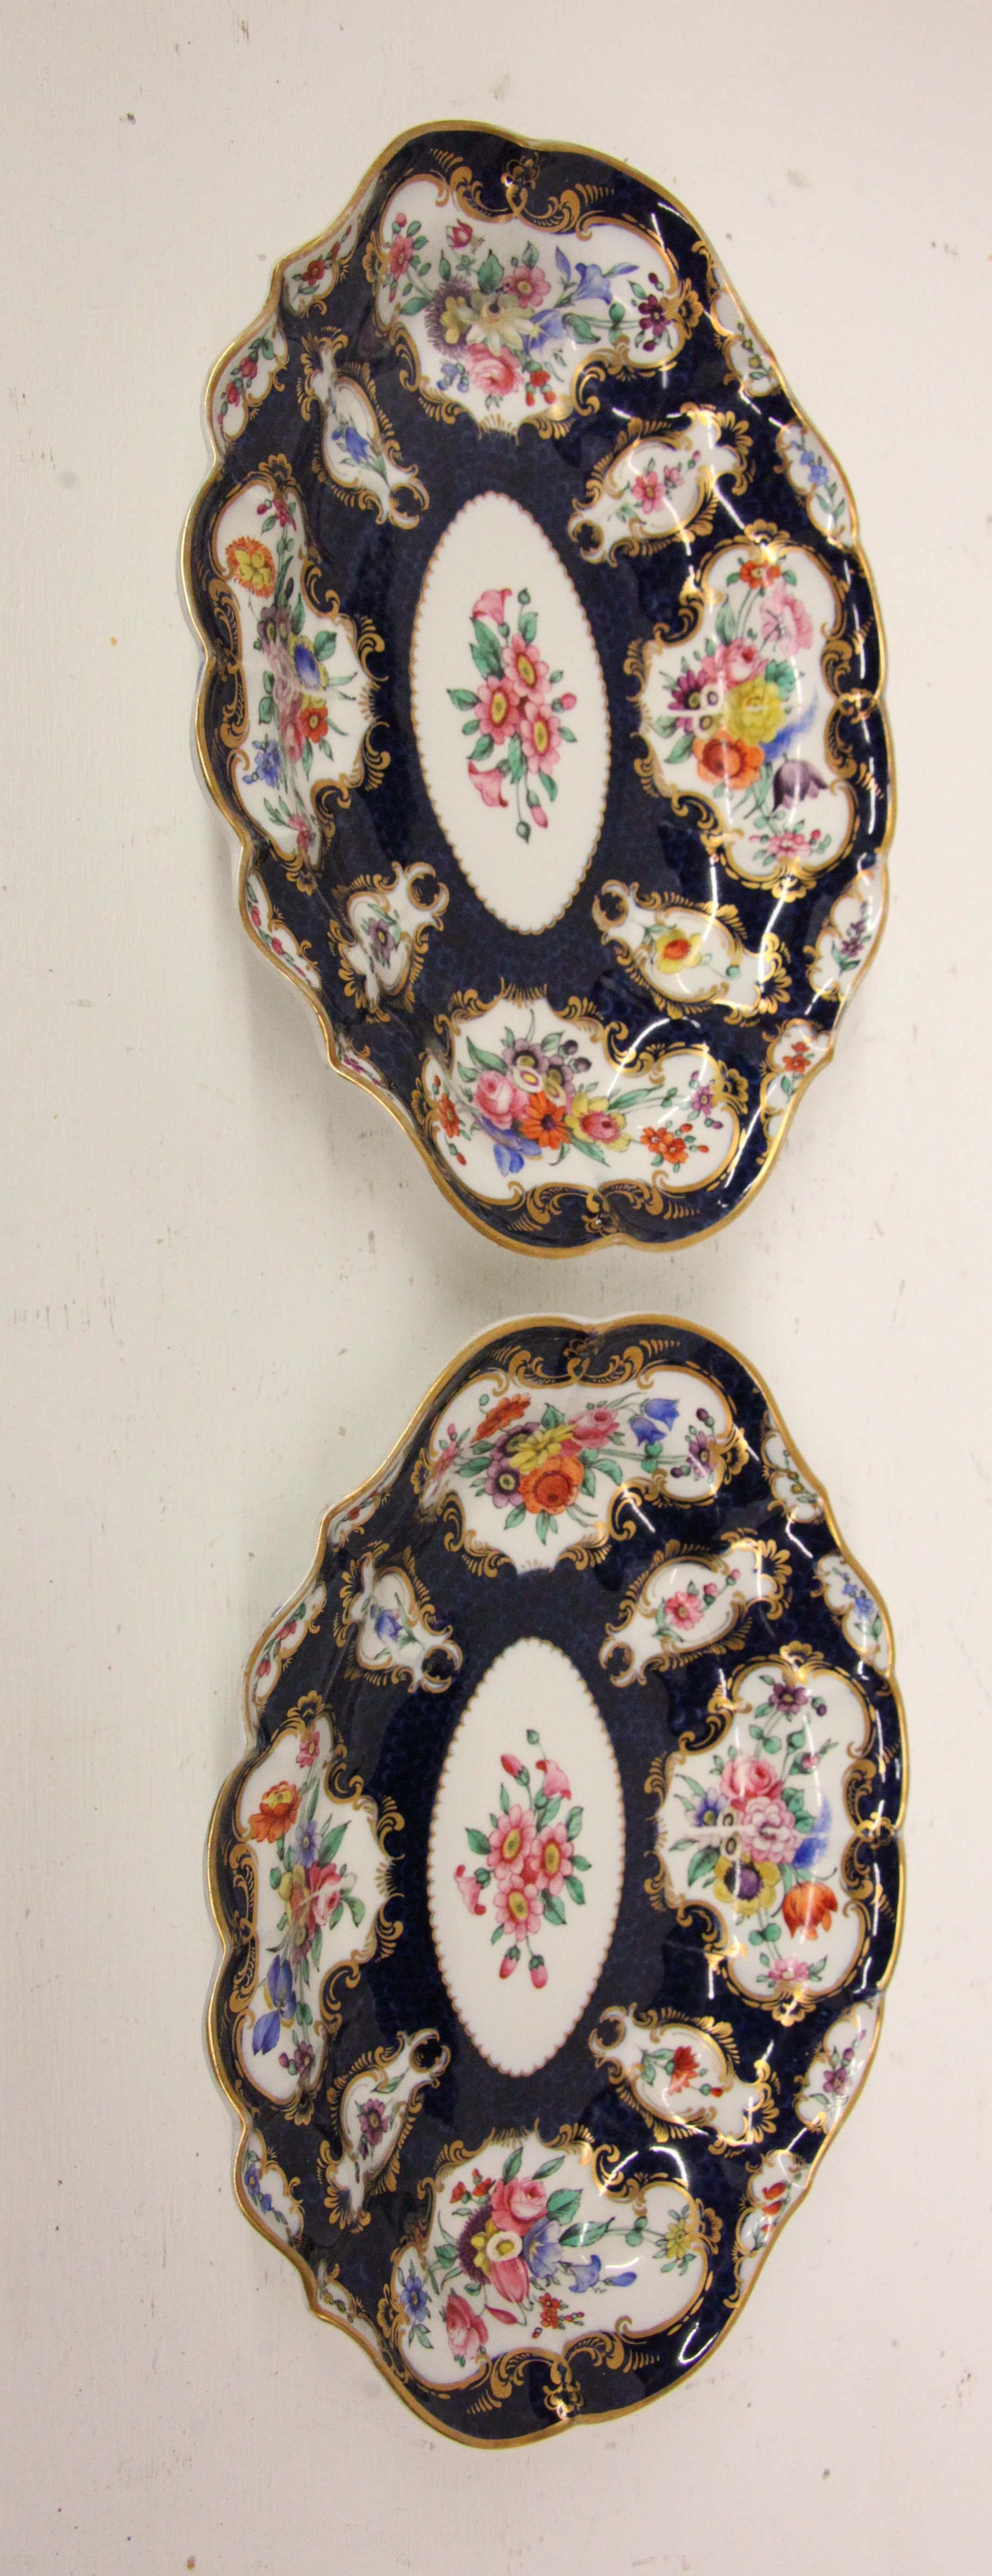 Pair of Royal Worcester oval dishes, beautifully shaped with the border filled with floral panels over a cobalt ground, accented with gilding throughout, the oval center with a bouquet of flowers.